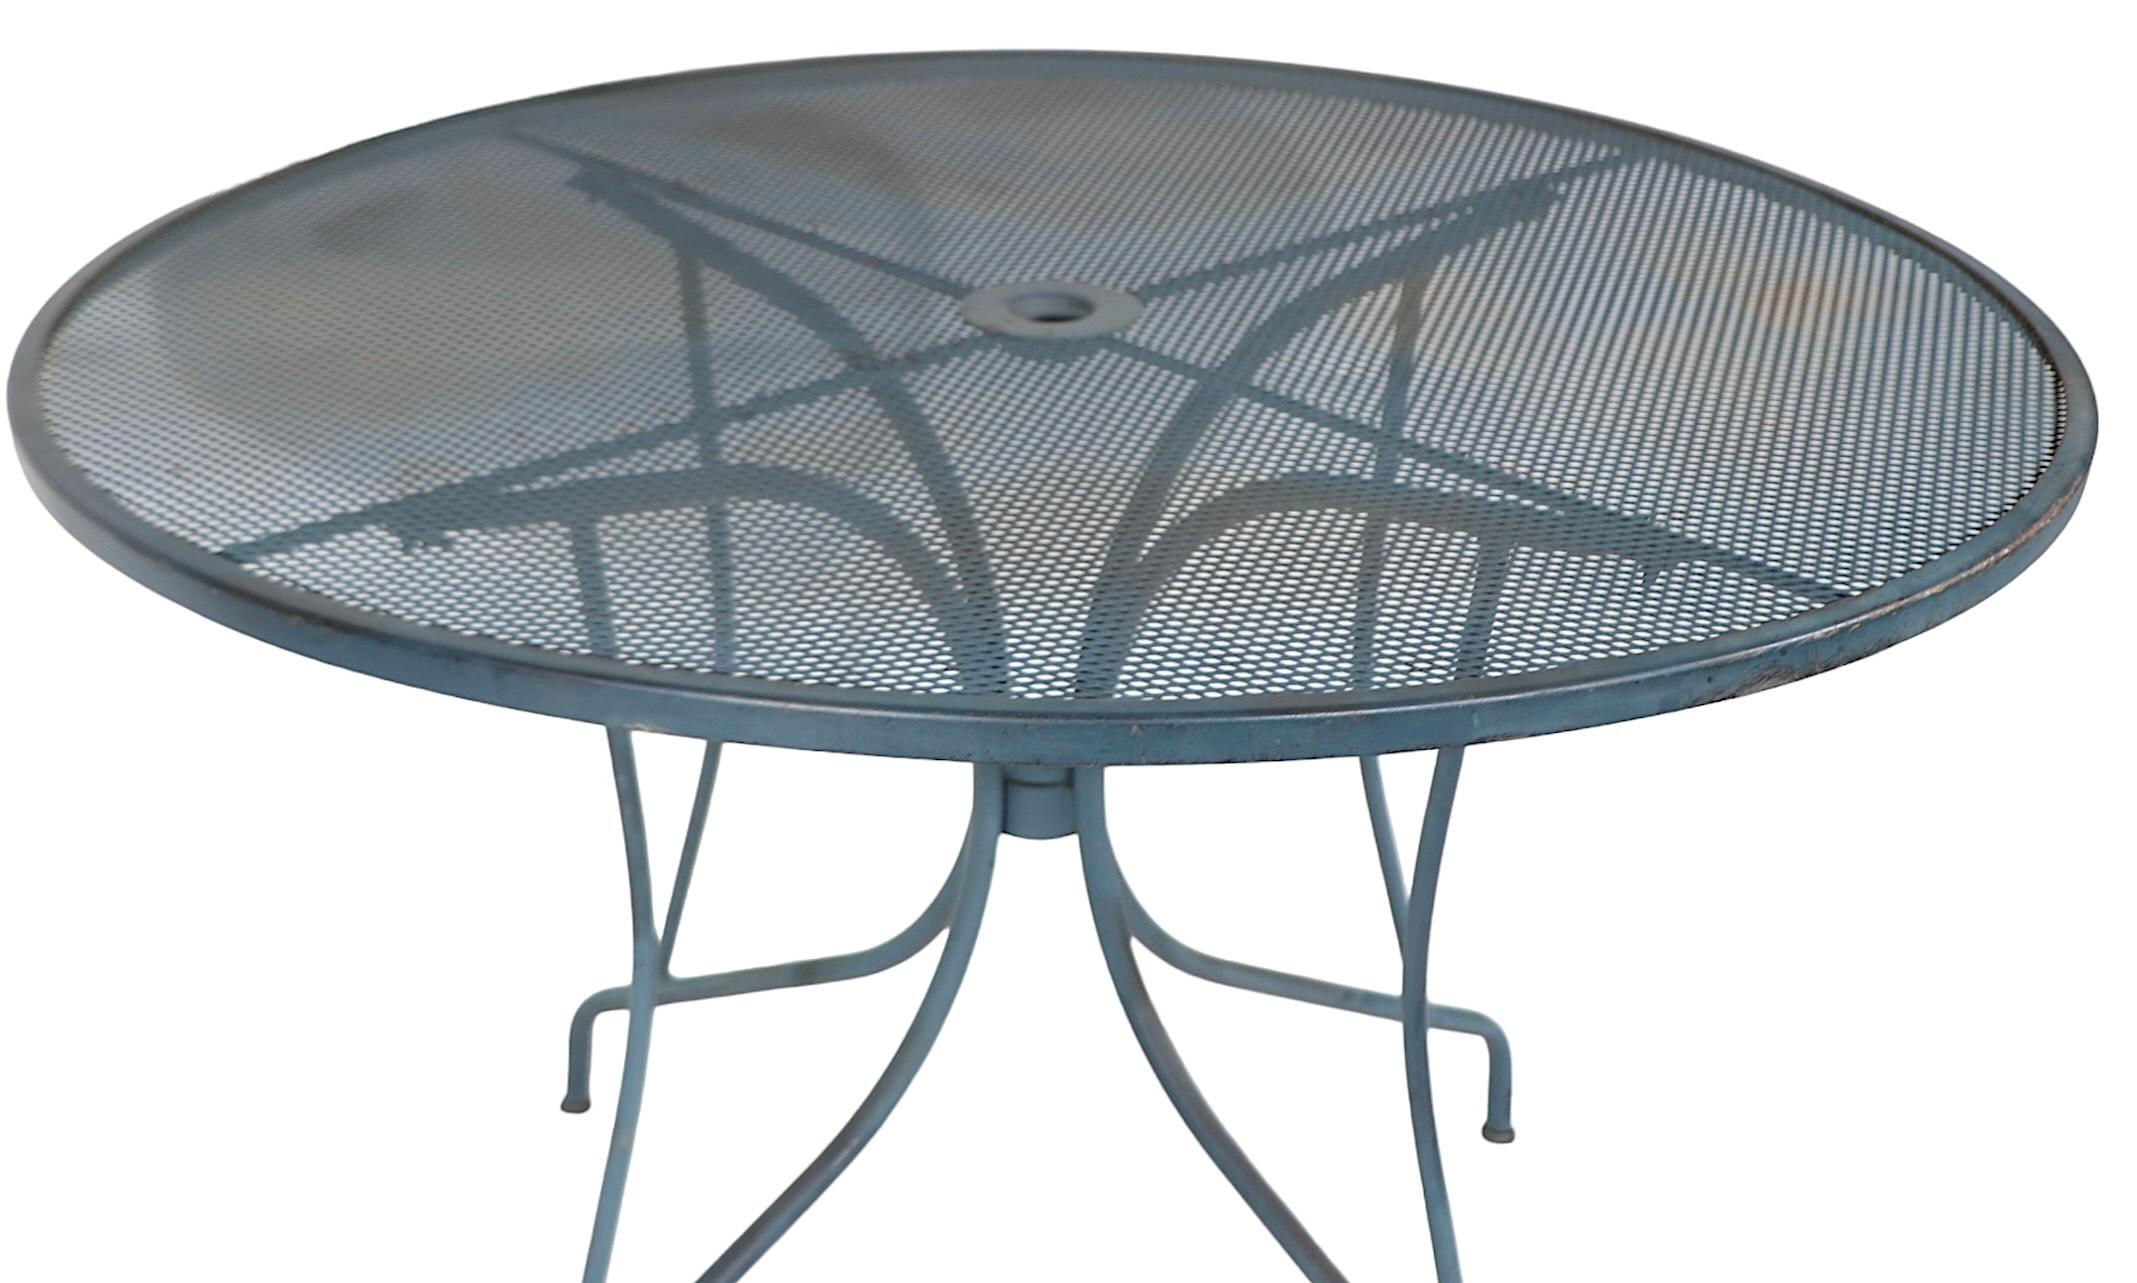 American Vintage Garden Patio Poolside Cafe Dining Table by Meadowcraft c. 1950/60's For Sale